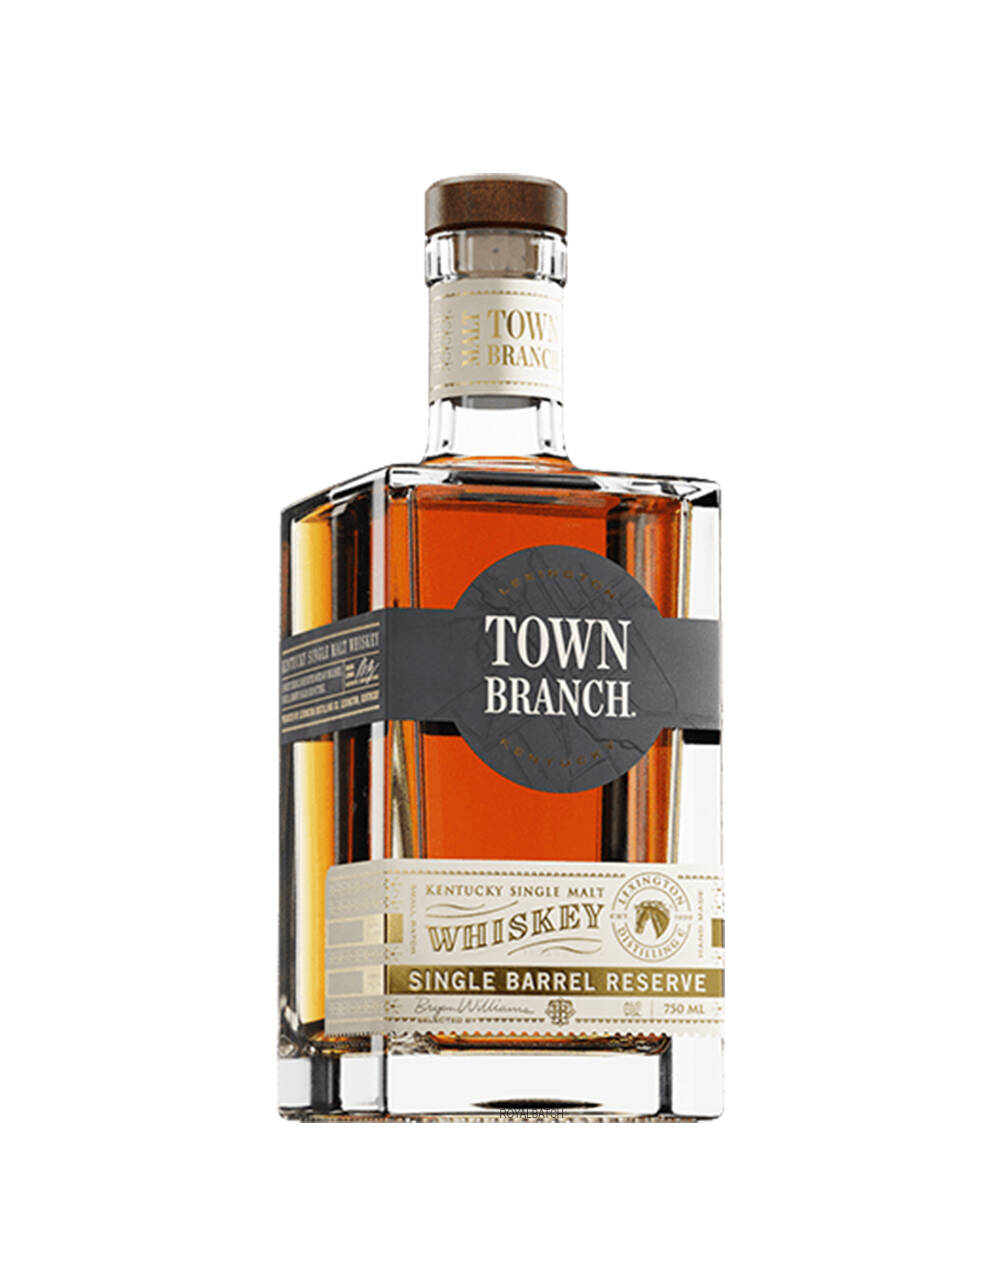 Town Branch Single Barrel Reserve Bourbon Whiskey Hand Selected by W.U.F Society